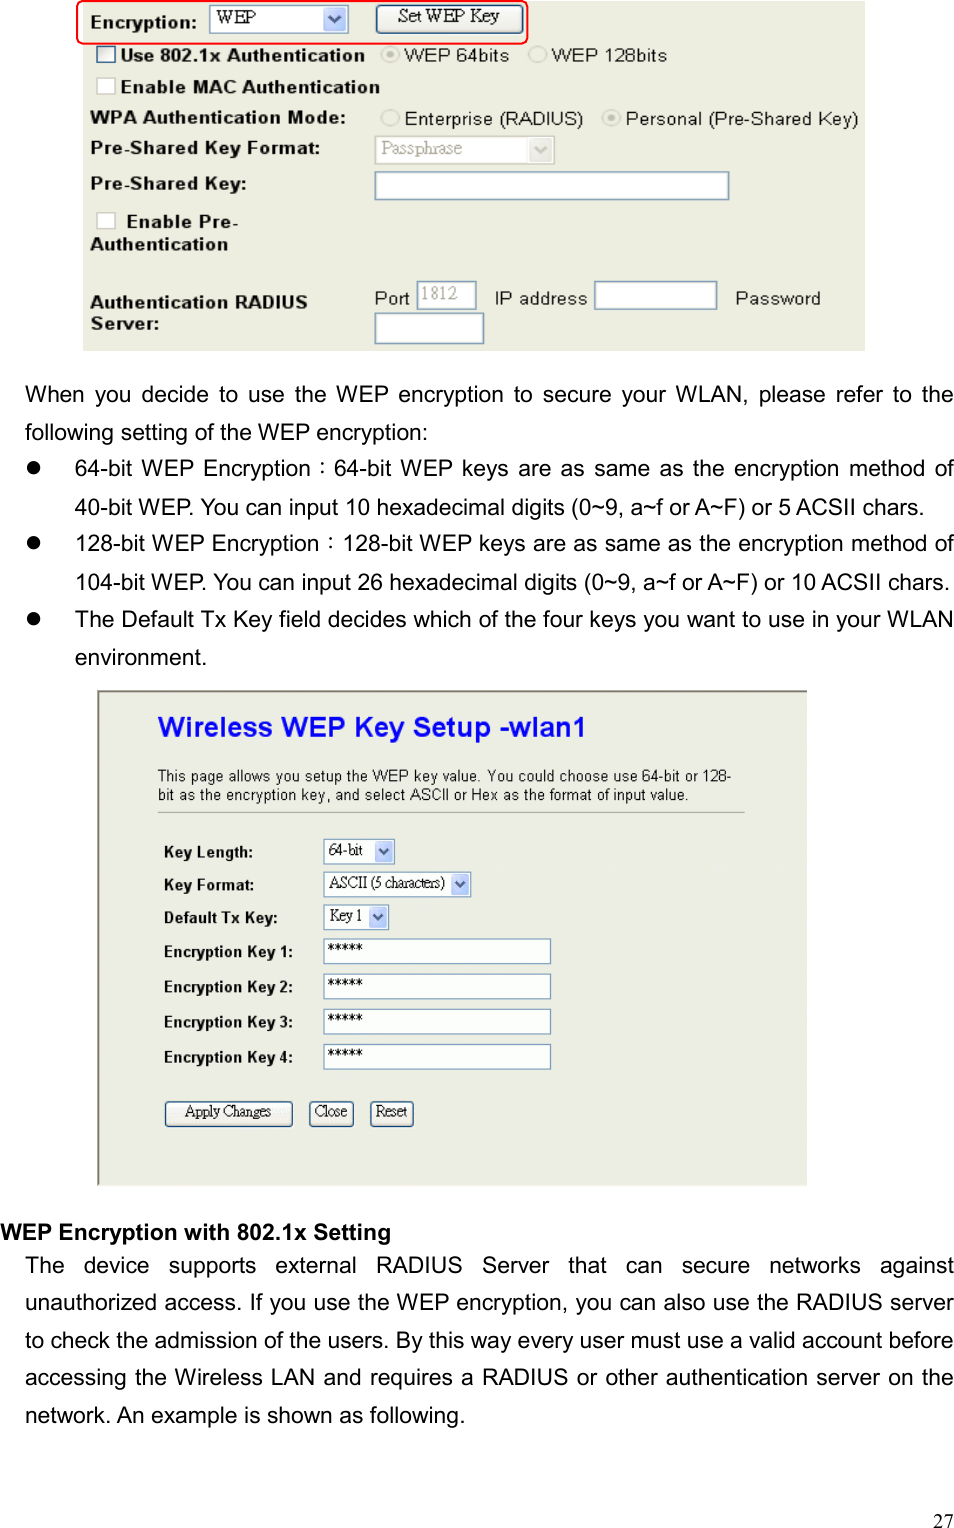  27        When you decide to use the WEP encryption to secure your WLAN, please refer to the following setting of the WEP encryption:   64-bit WEP Encryption：64-bit WEP keys are as same as the encryption method of 40-bit WEP. You can input 10 hexadecimal digits (0~9, a~f or A~F) or 5 ACSII chars.   128-bit WEP Encryption：128-bit WEP keys are as same as the encryption method of 104-bit WEP. You can input 26 hexadecimal digits (0~9, a~f or A~F) or 10 ACSII chars.   The Default Tx Key field decides which of the four keys you want to use in your WLAN environment.  WEP Encryption with 802.1x Setting The device supports external RADIUS Server that can secure networks against unauthorized access. If you use the WEP encryption, you can also use the RADIUS server to check the admission of the users. By this way every user must use a valid account before accessing the Wireless LAN and requires a RADIUS or other authentication server on the network. An example is shown as following. 